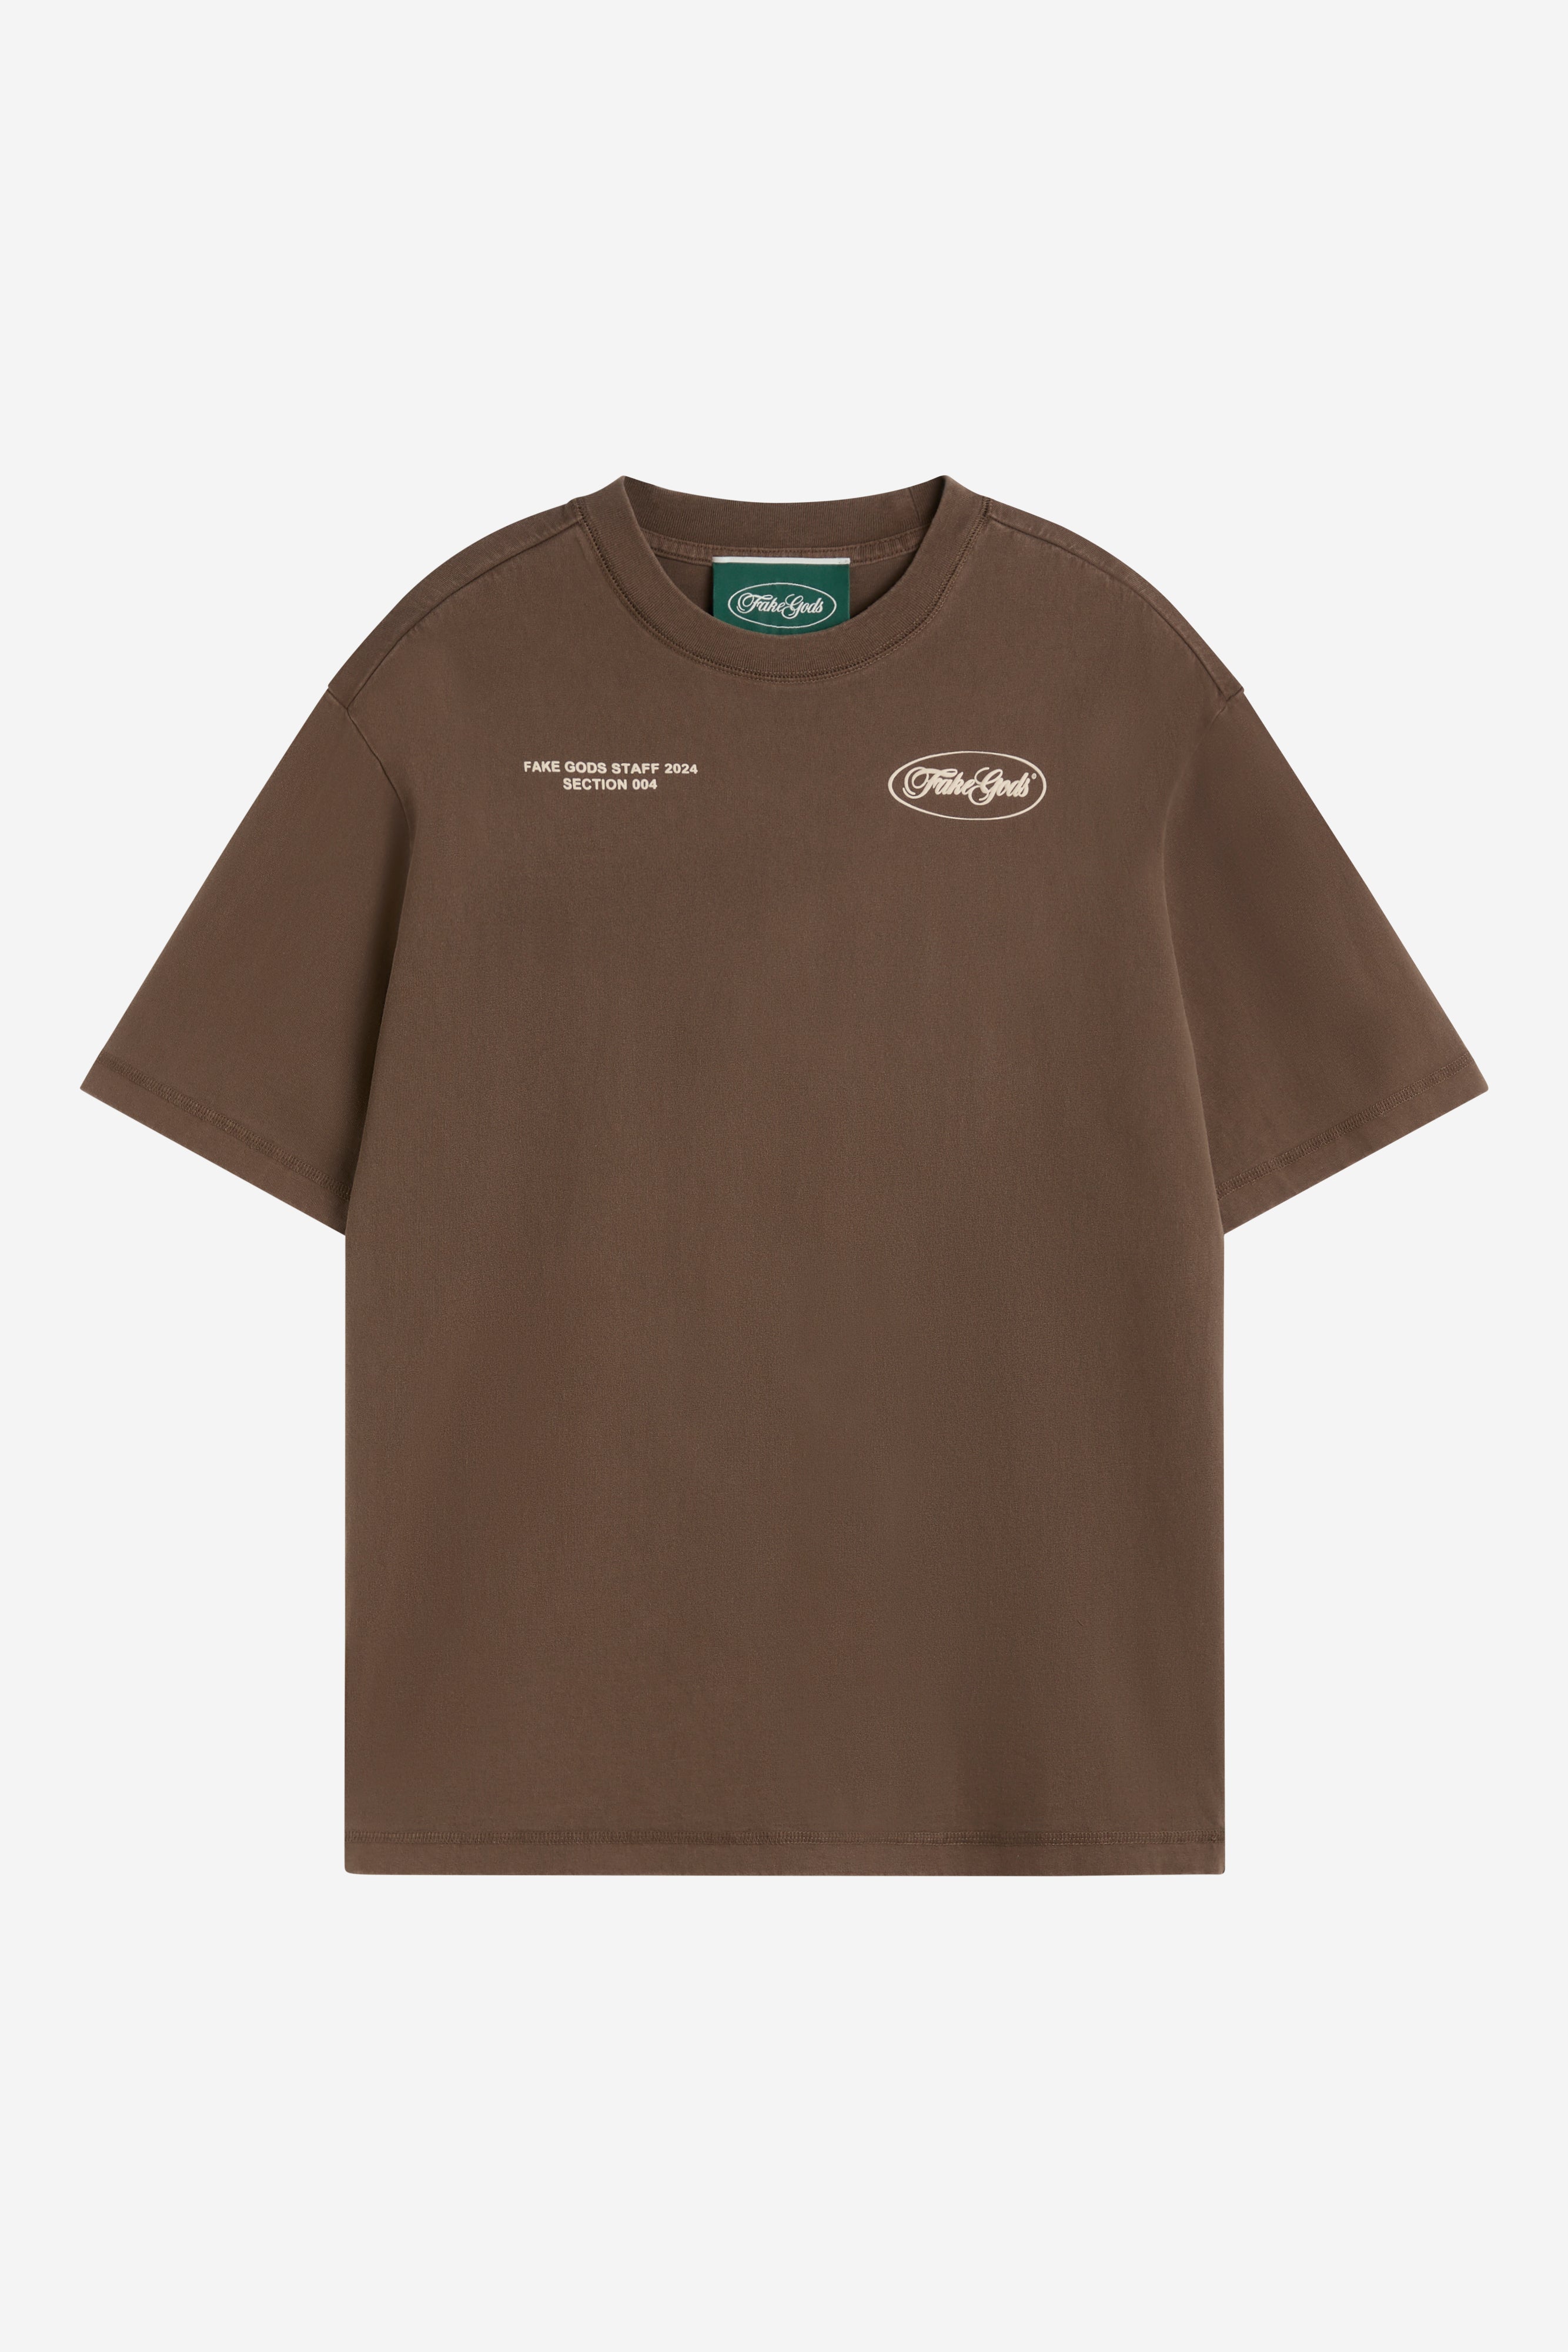 WASHED STAFF TEE BROWN